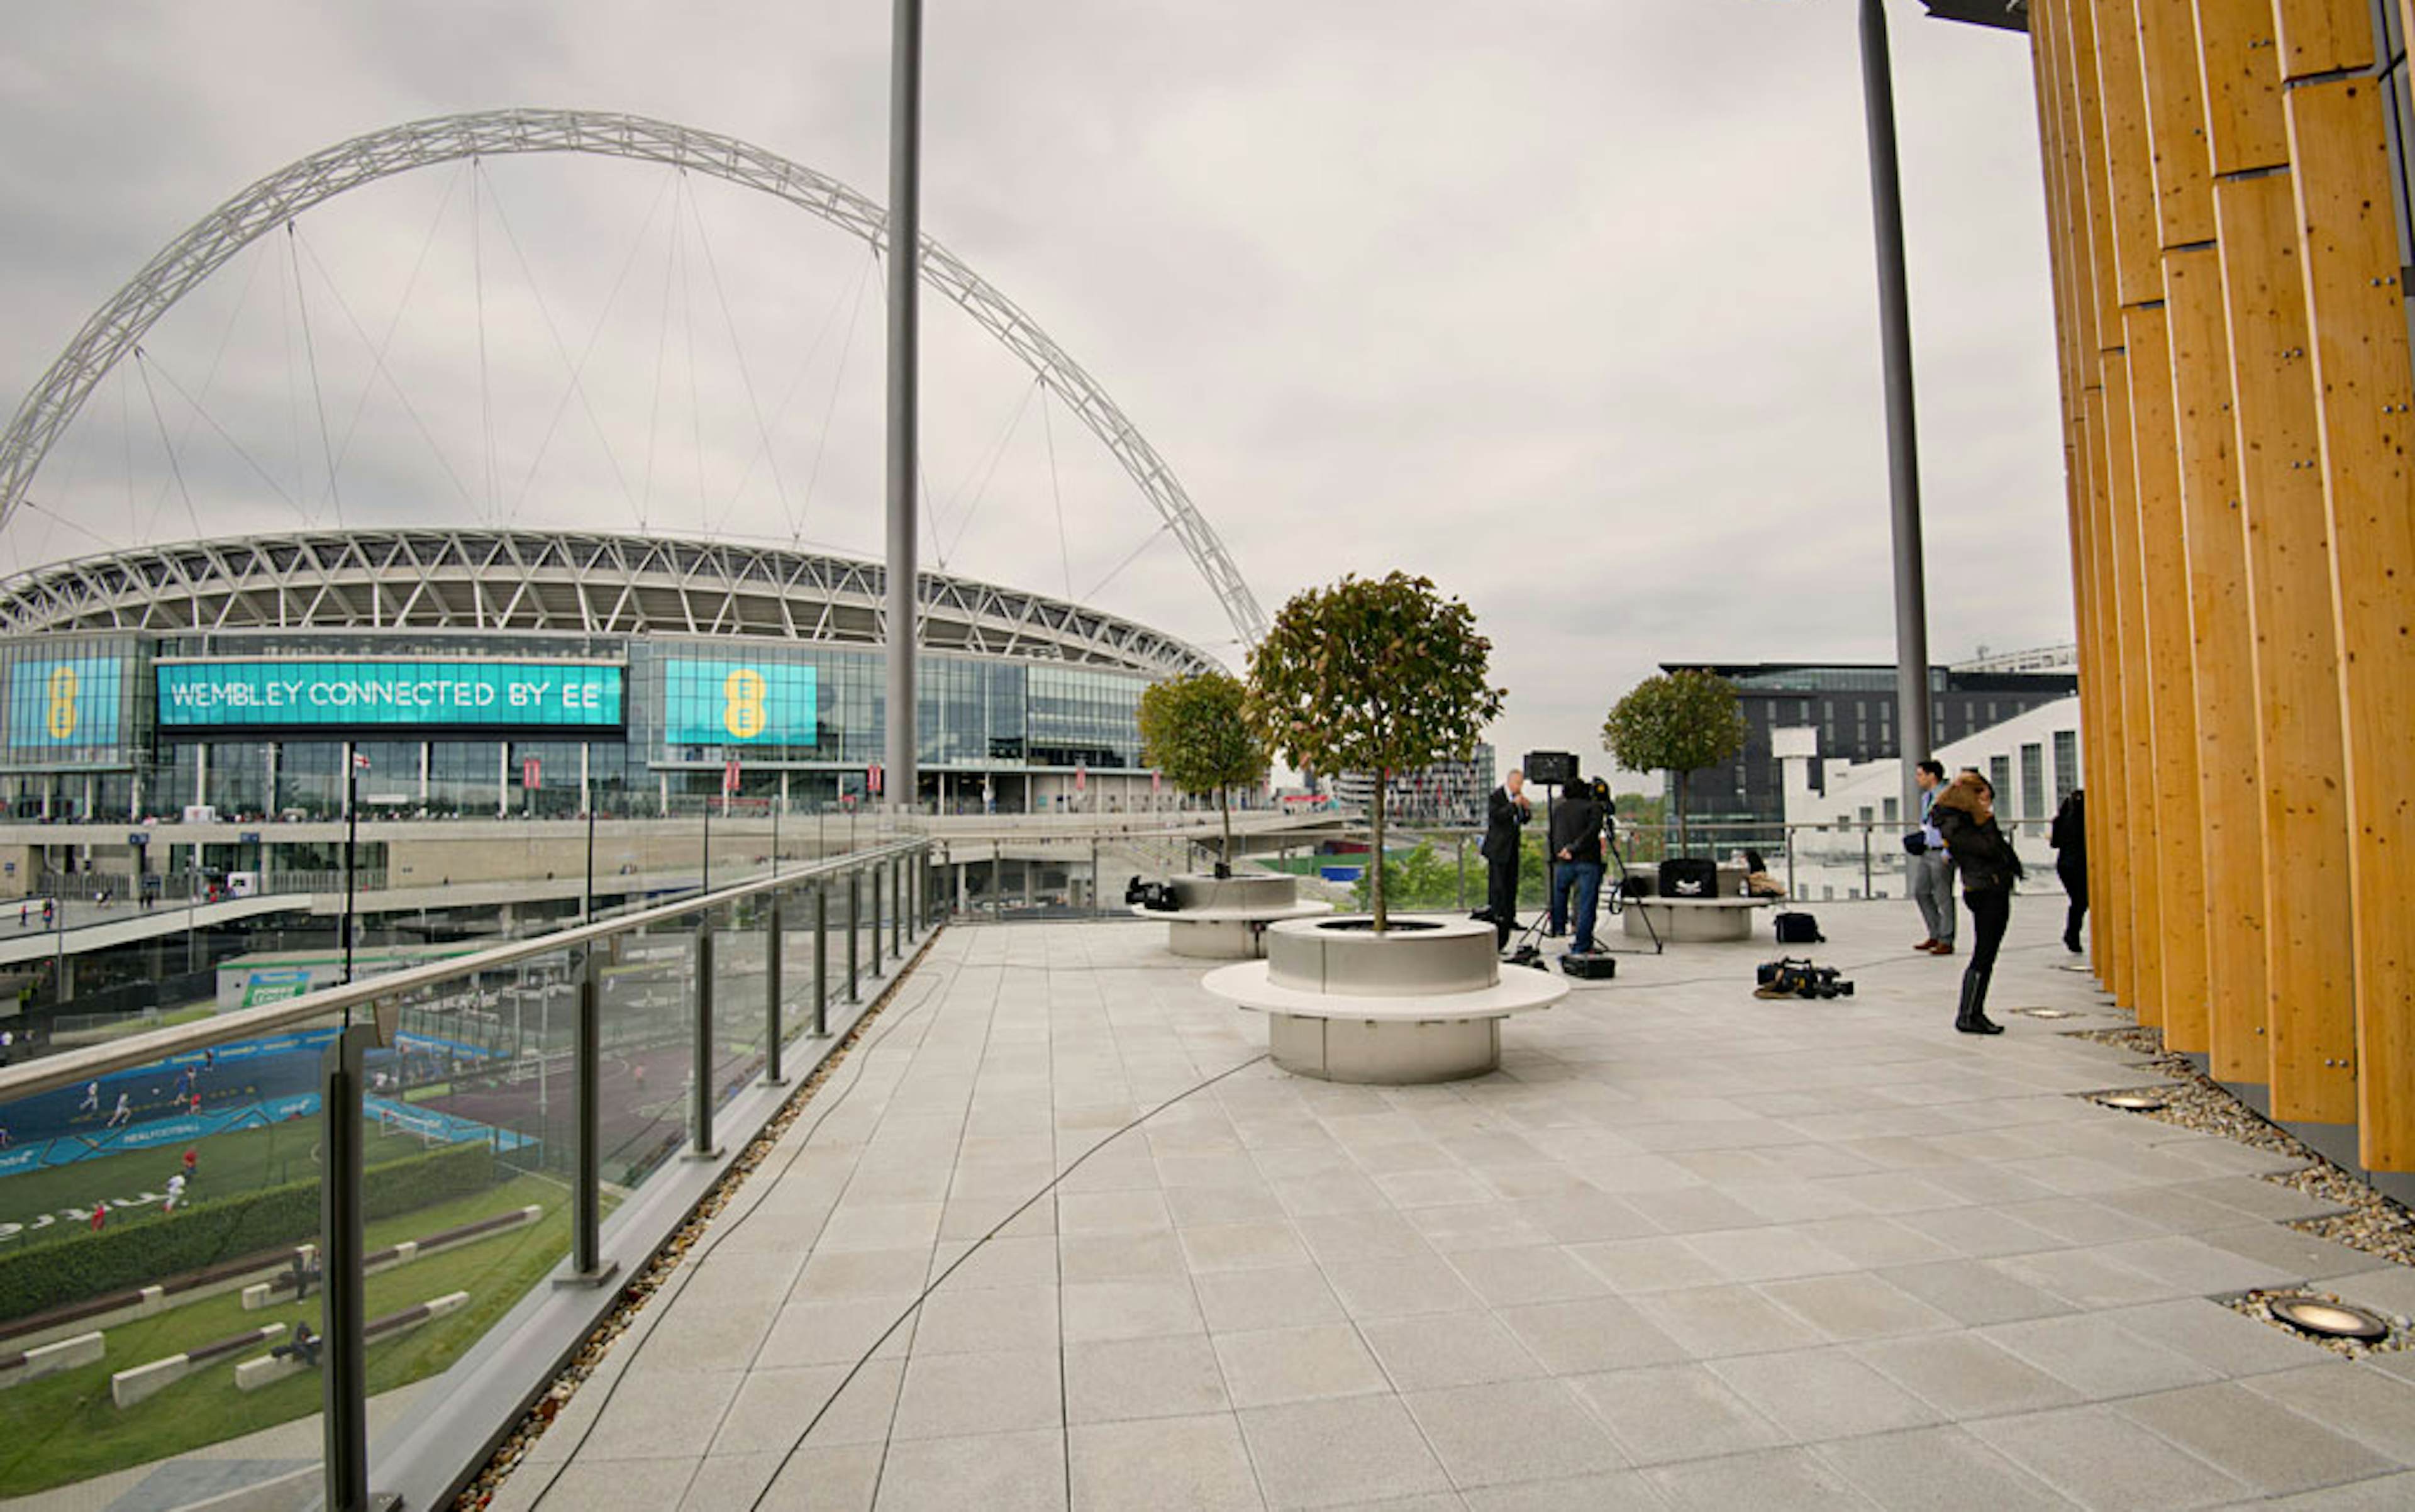 The Drum at Wembley - Terrace Rooms image 1